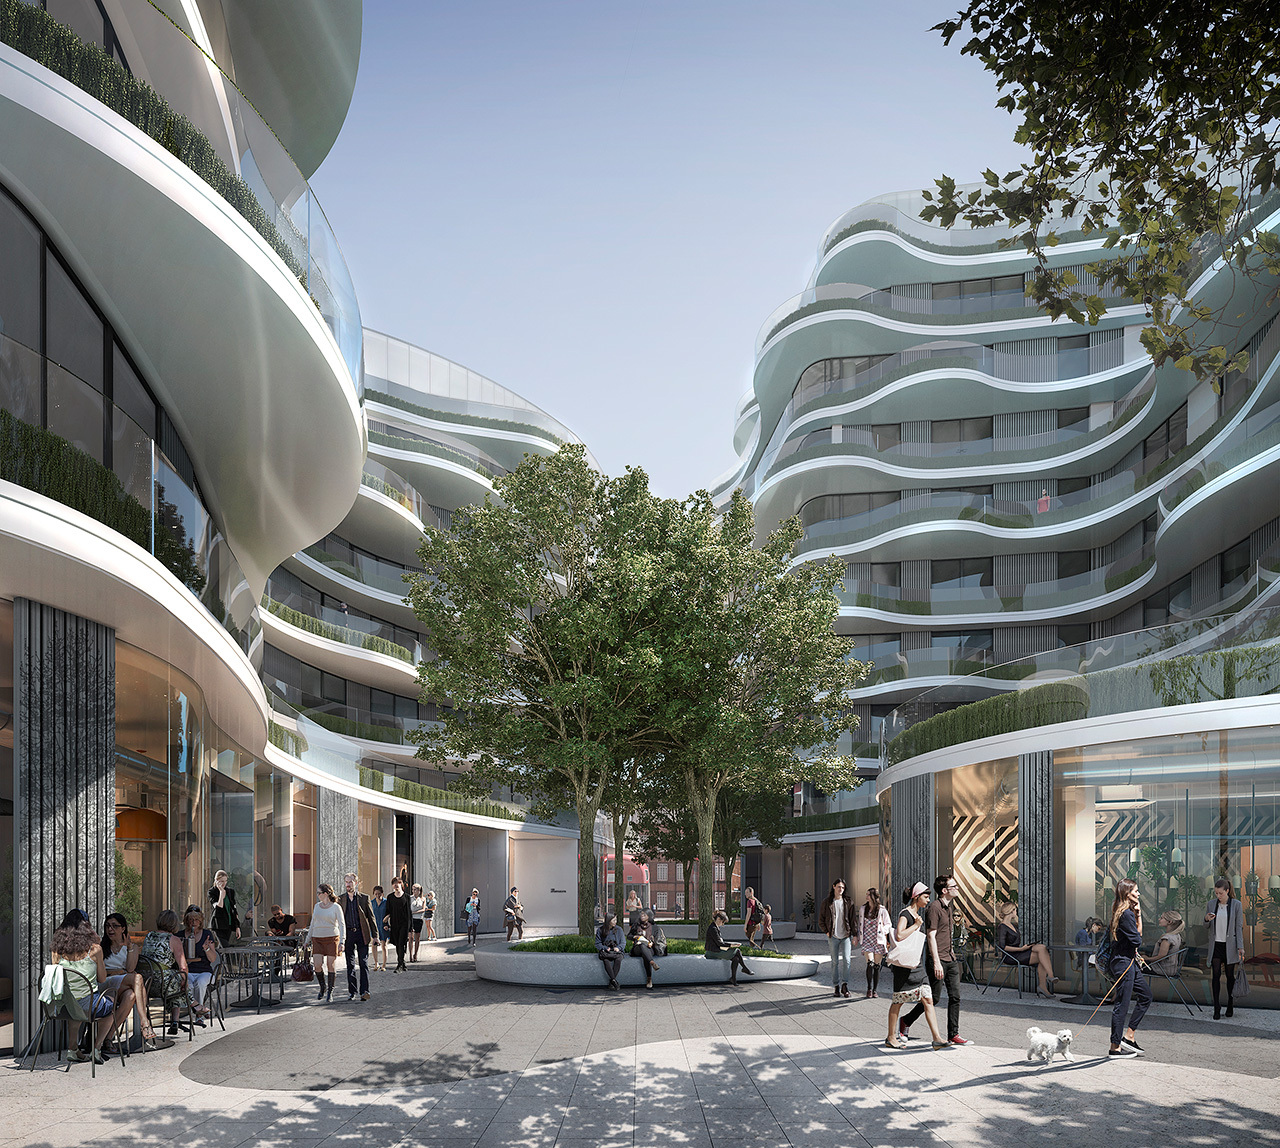 The new mixed-use courtyard space that links Tower Bridge Road and Bermondsey High Street
